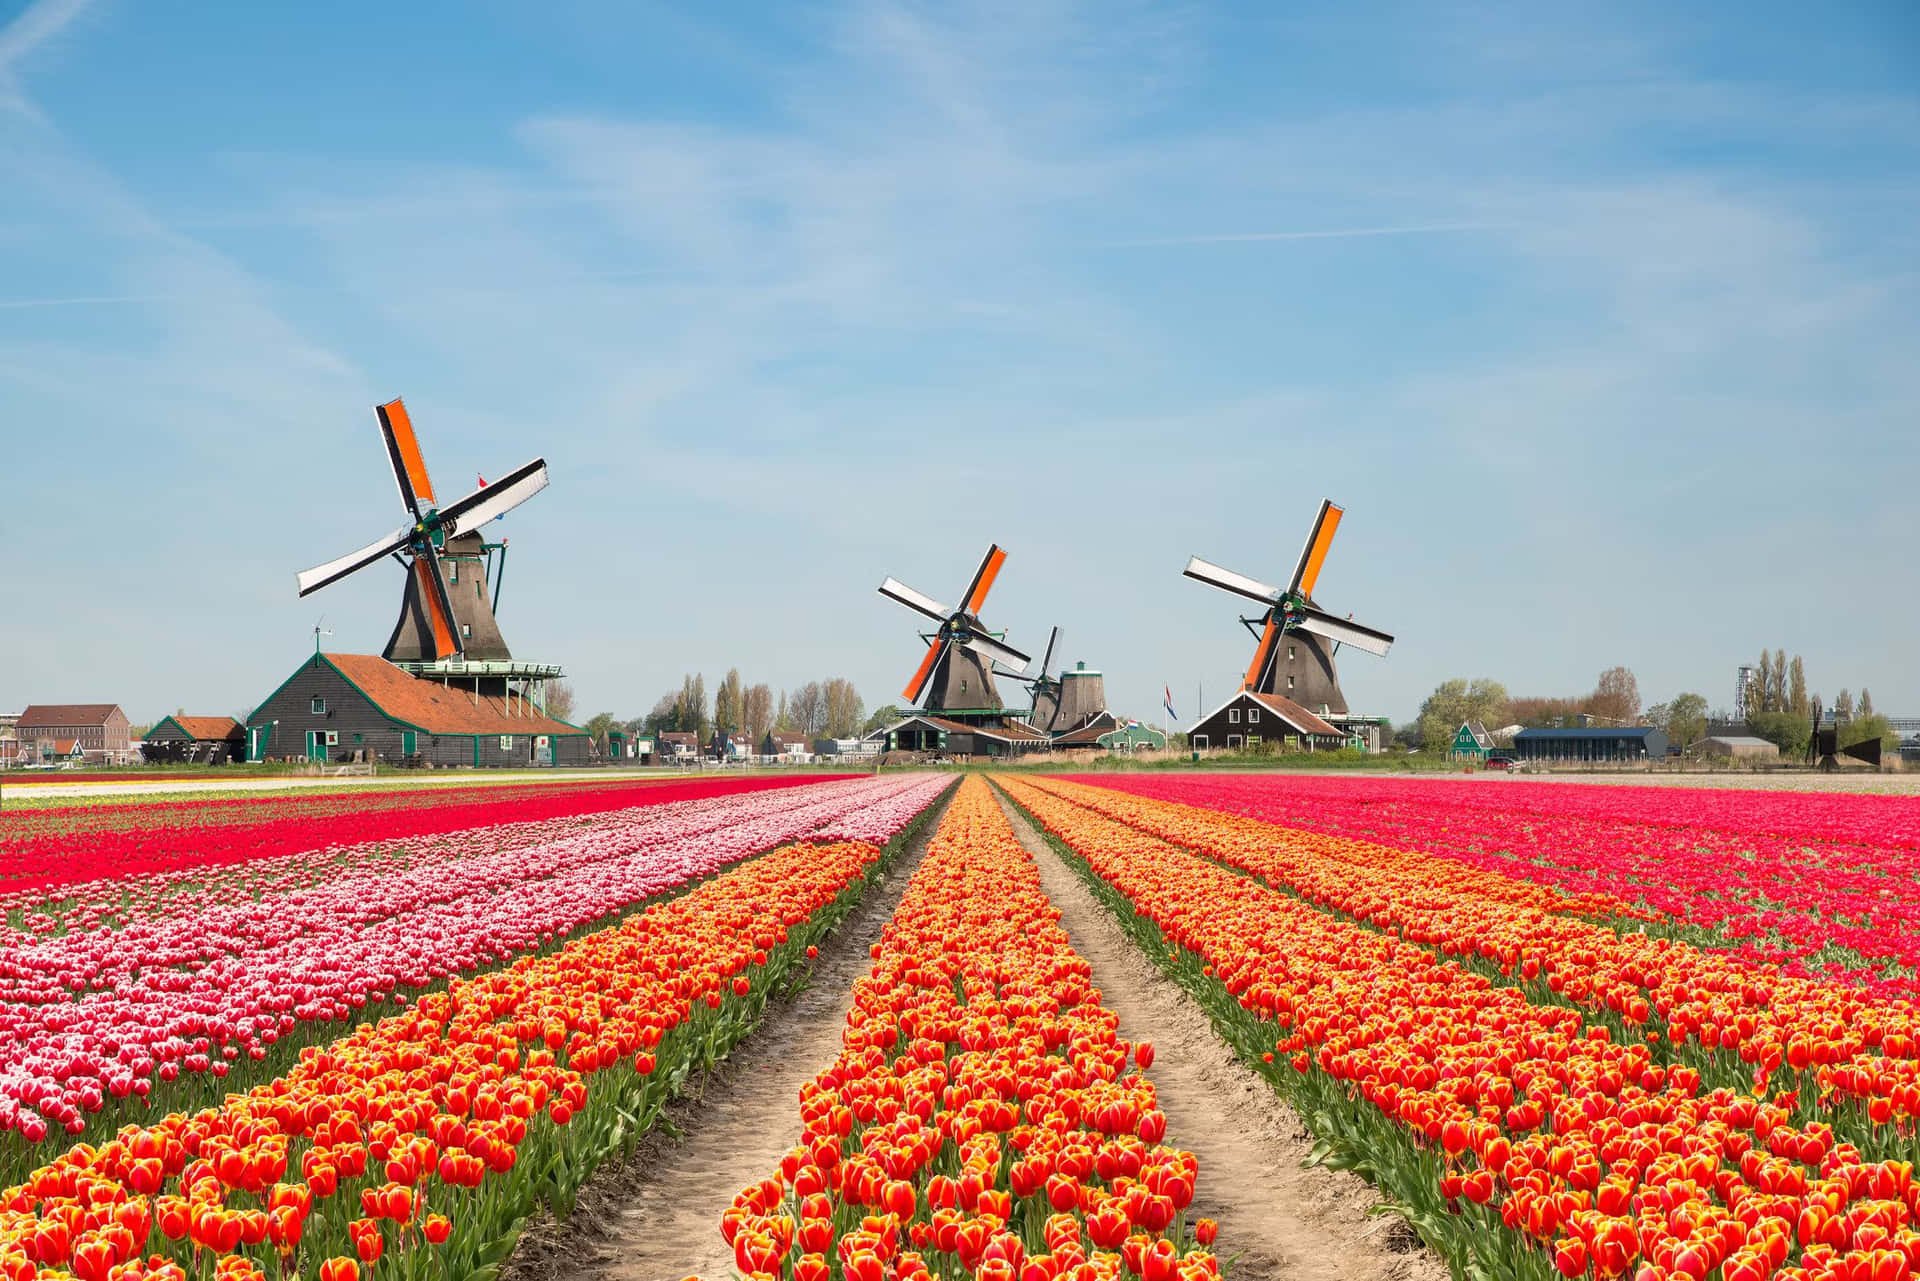 Explore the beauty of the Netherlands